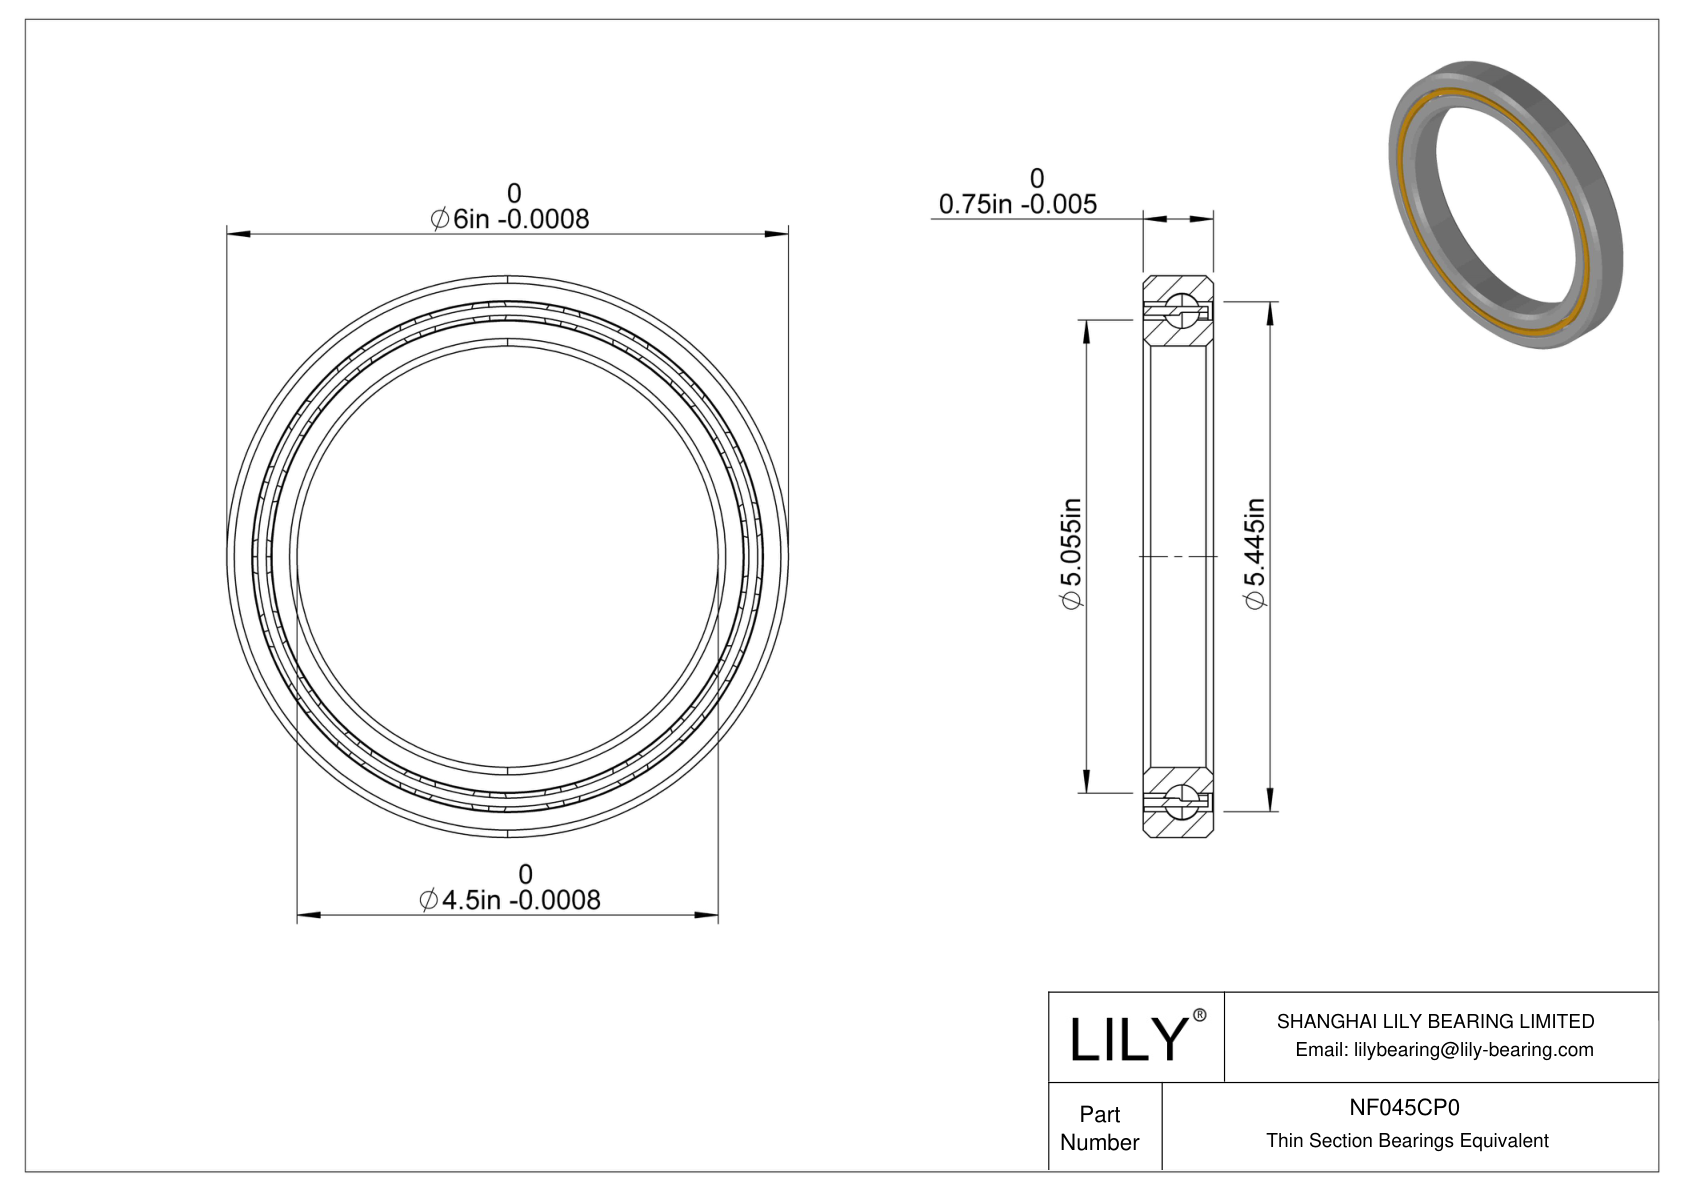 NF045CP0 Constant Section (CS) Bearings cad drawing